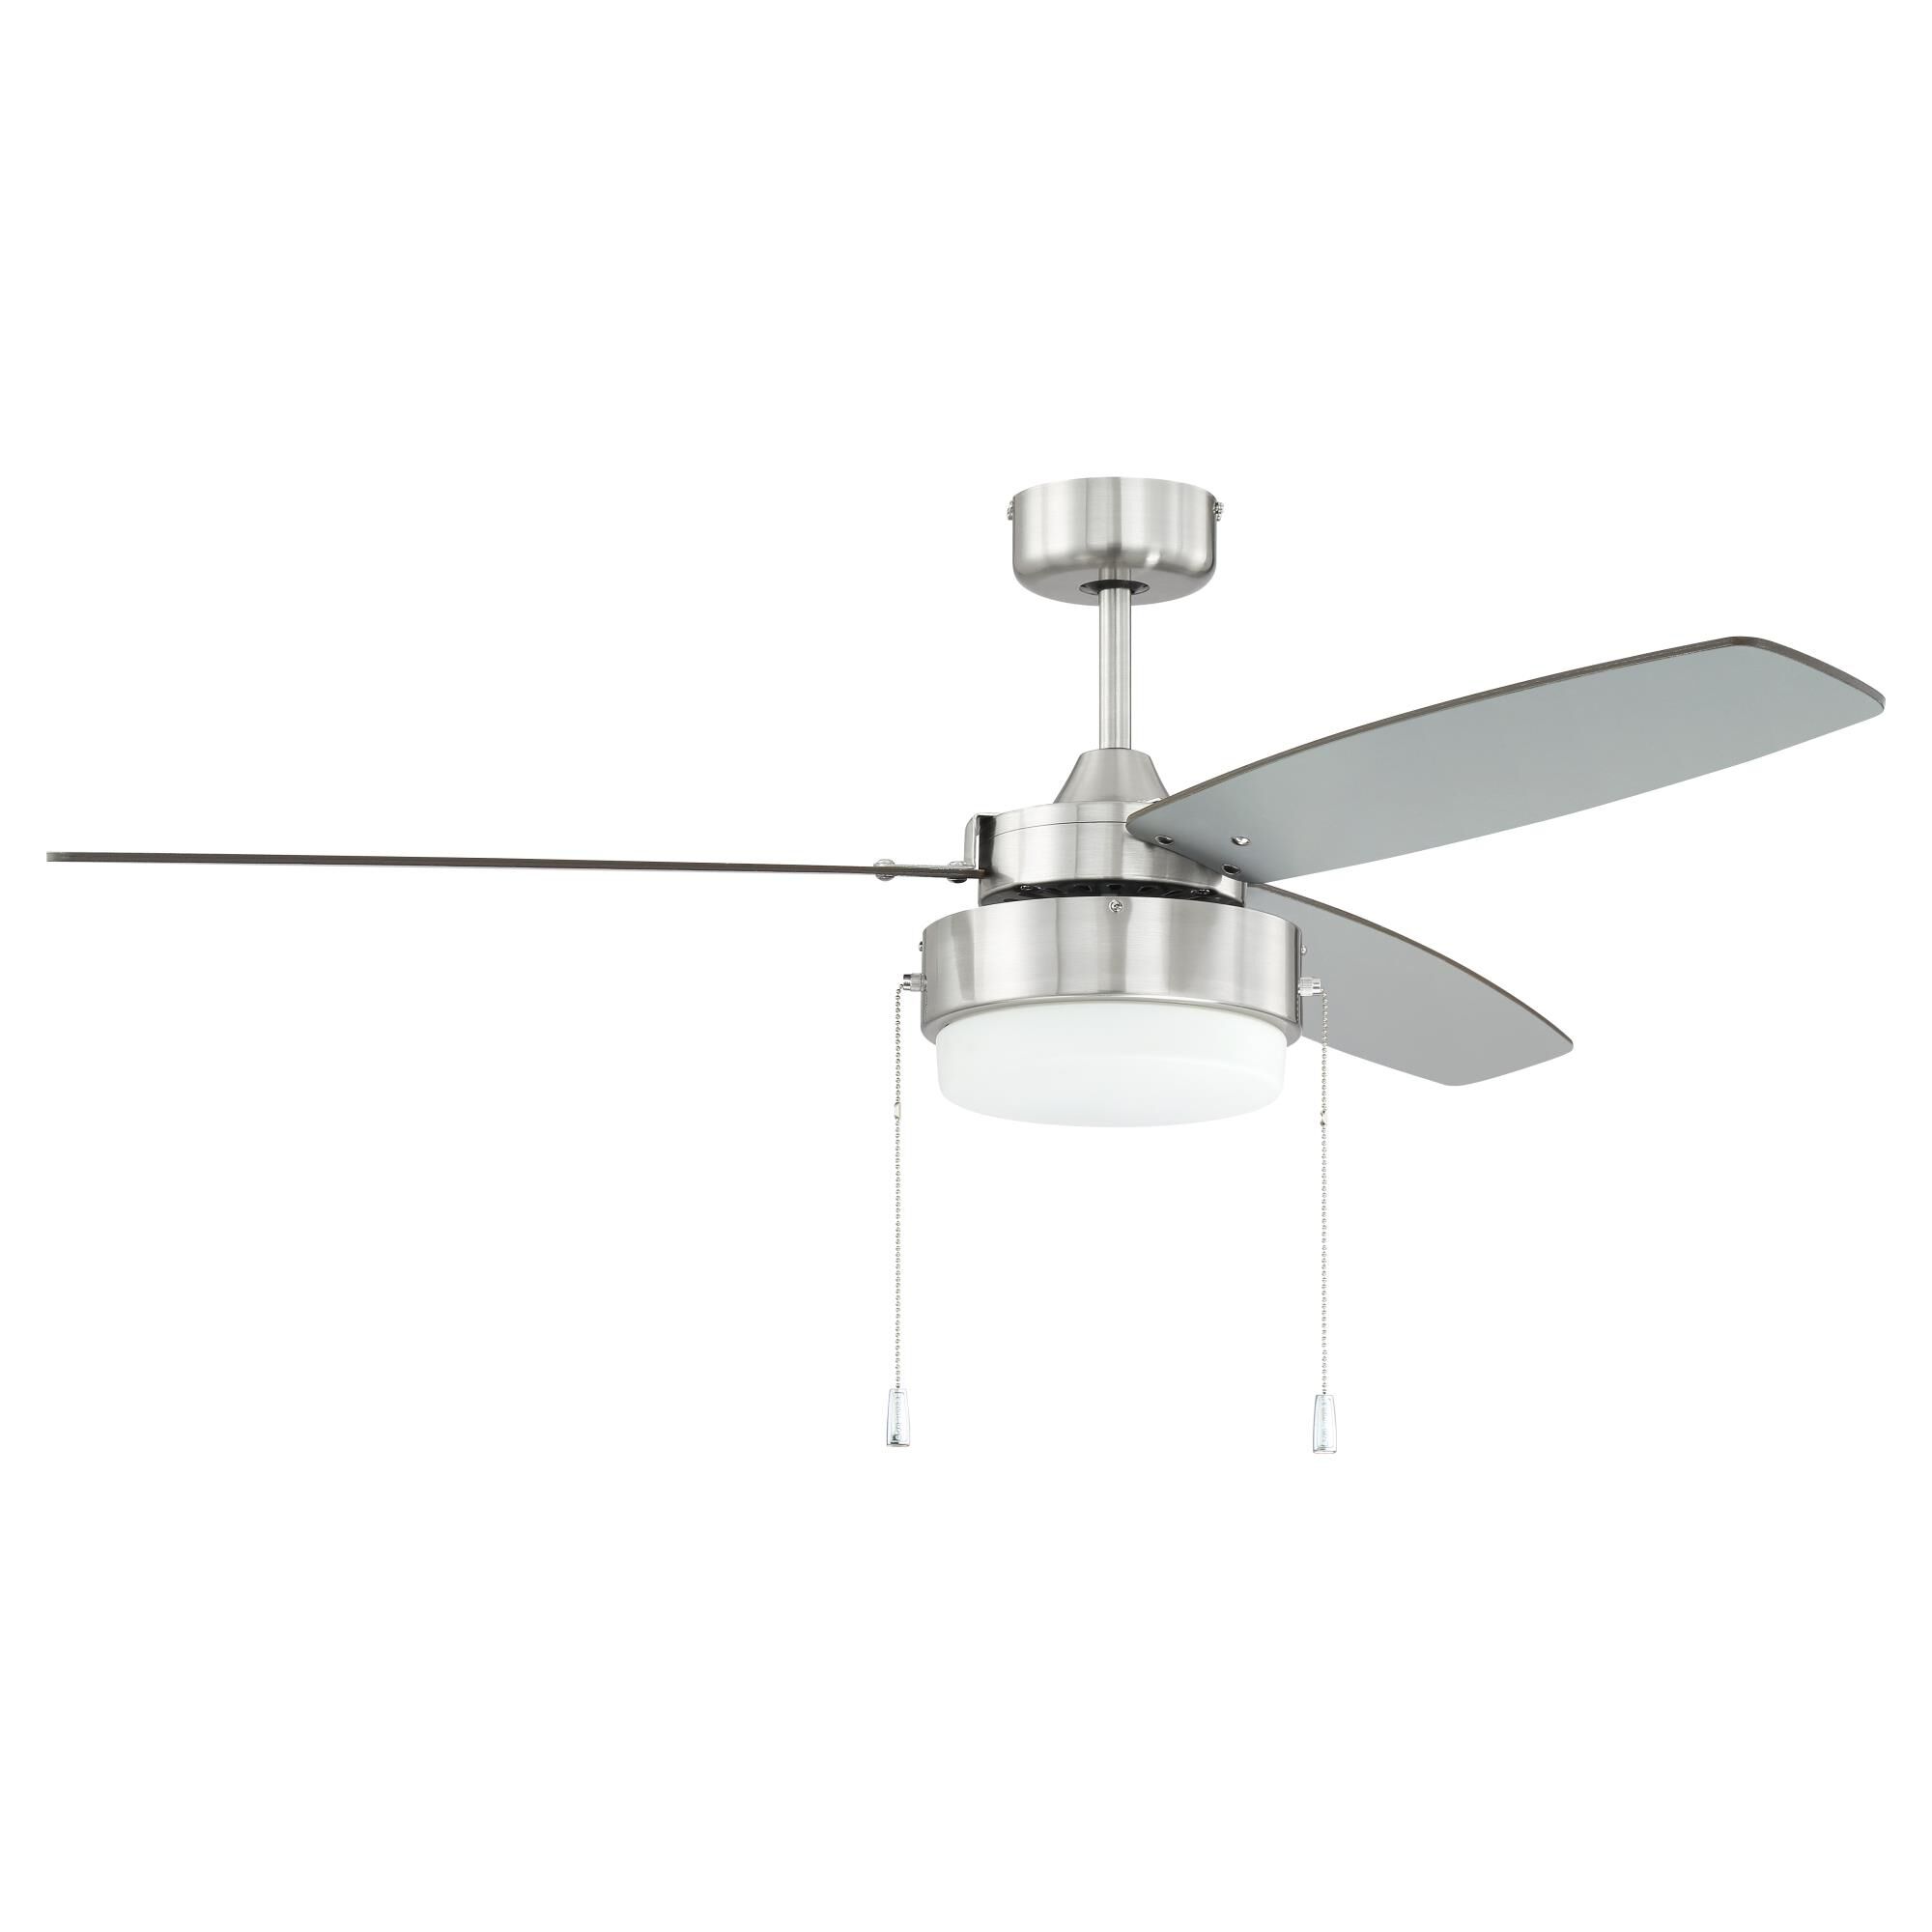 Photos - Fan Craftmade Intrepid 52 Inch Ceiling  with Light Kit Intrepid - INT52BNK3